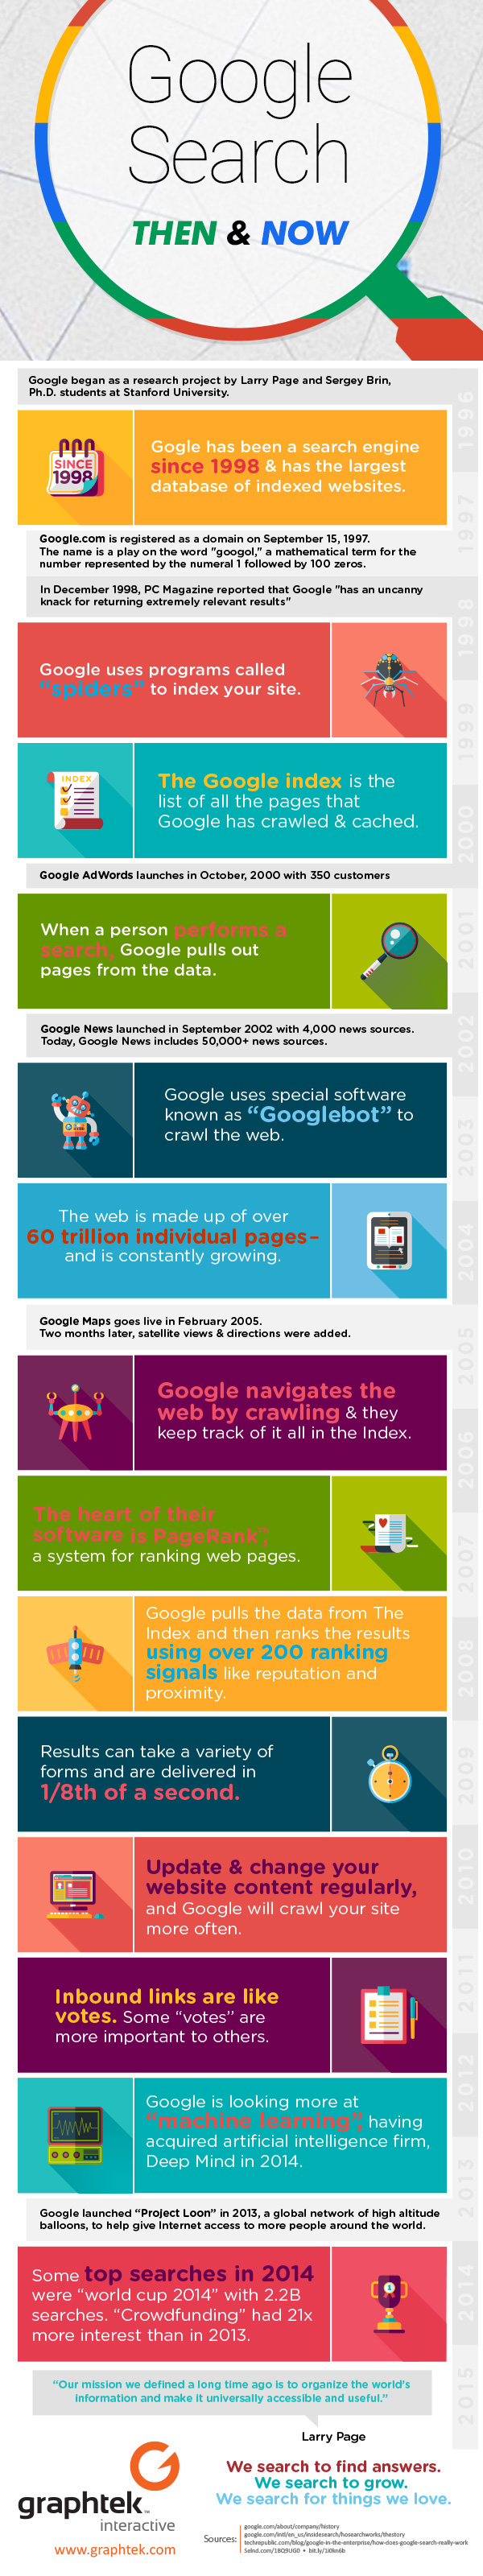 infographic___googleSearch_600px